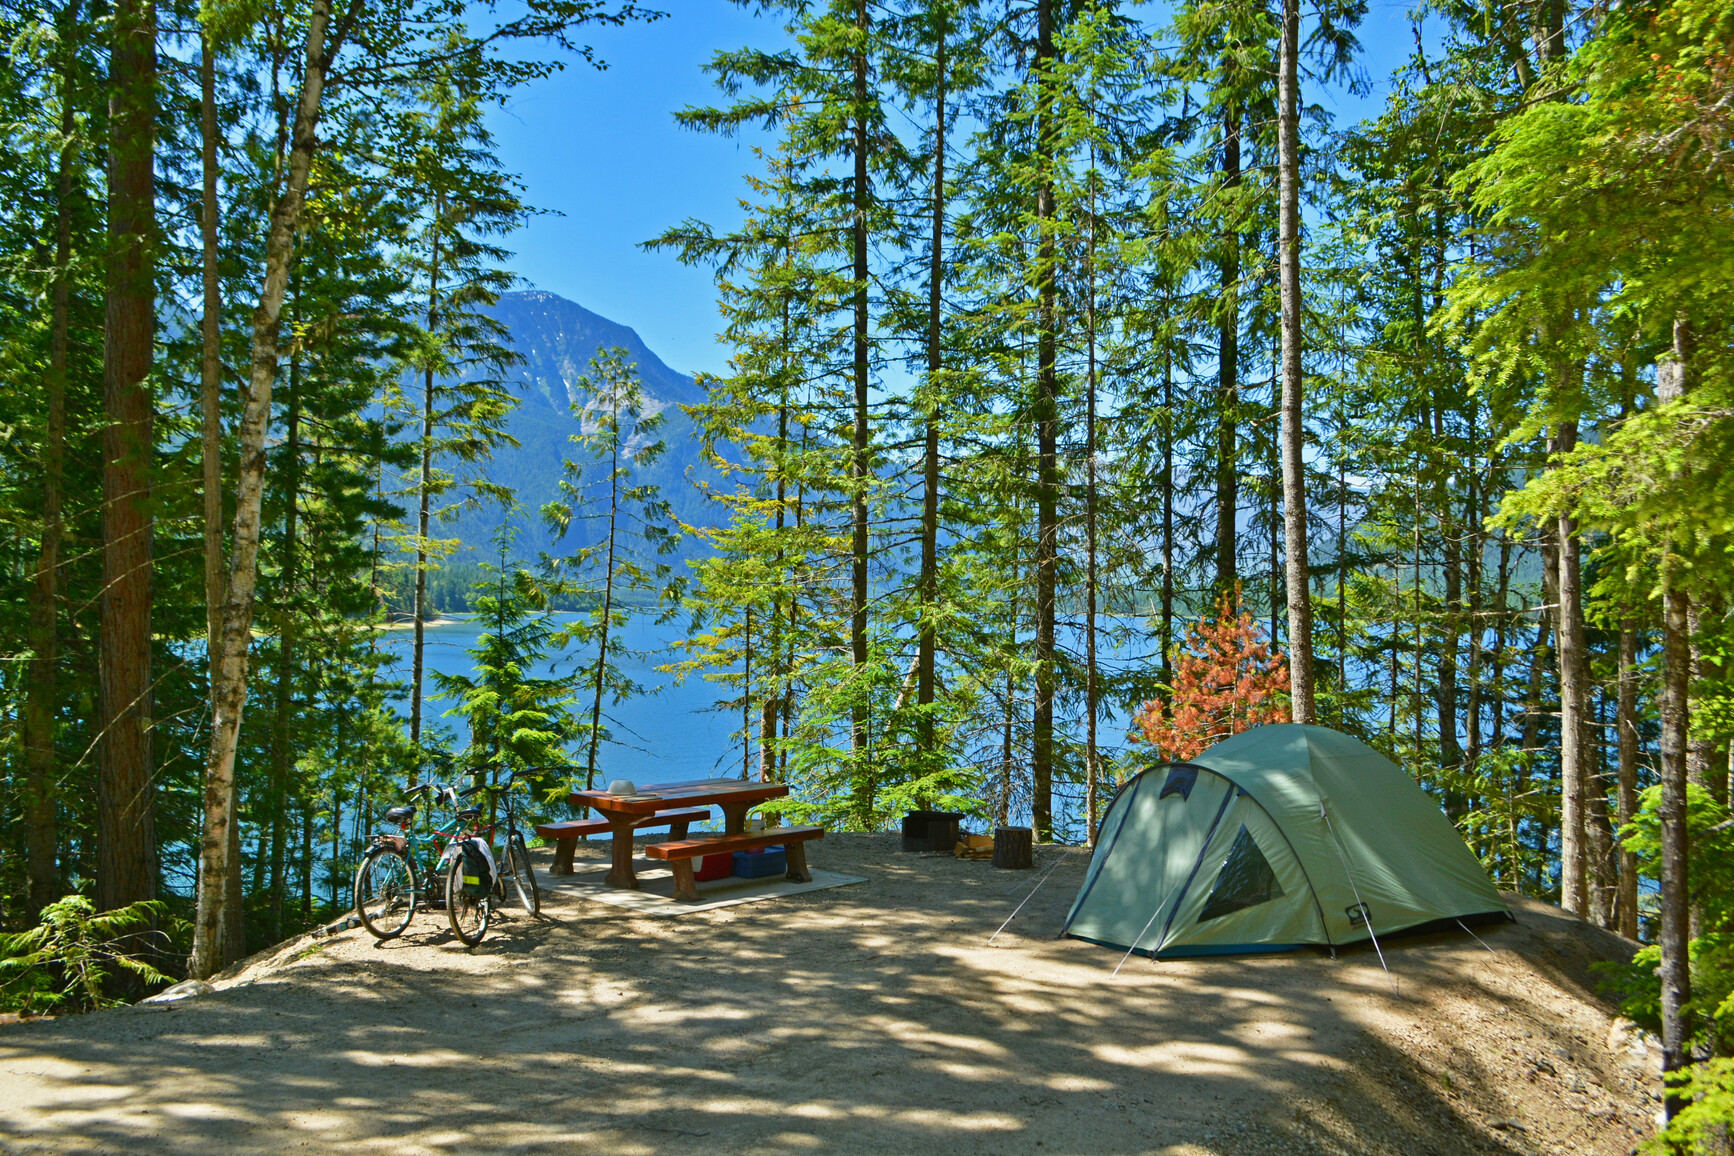 McDonald Creek Park - A campsite surrounded by trees and forest that overlooks Arrow Lake. A tent, picnic table, fire ring and 2 bikes are in the campsite.